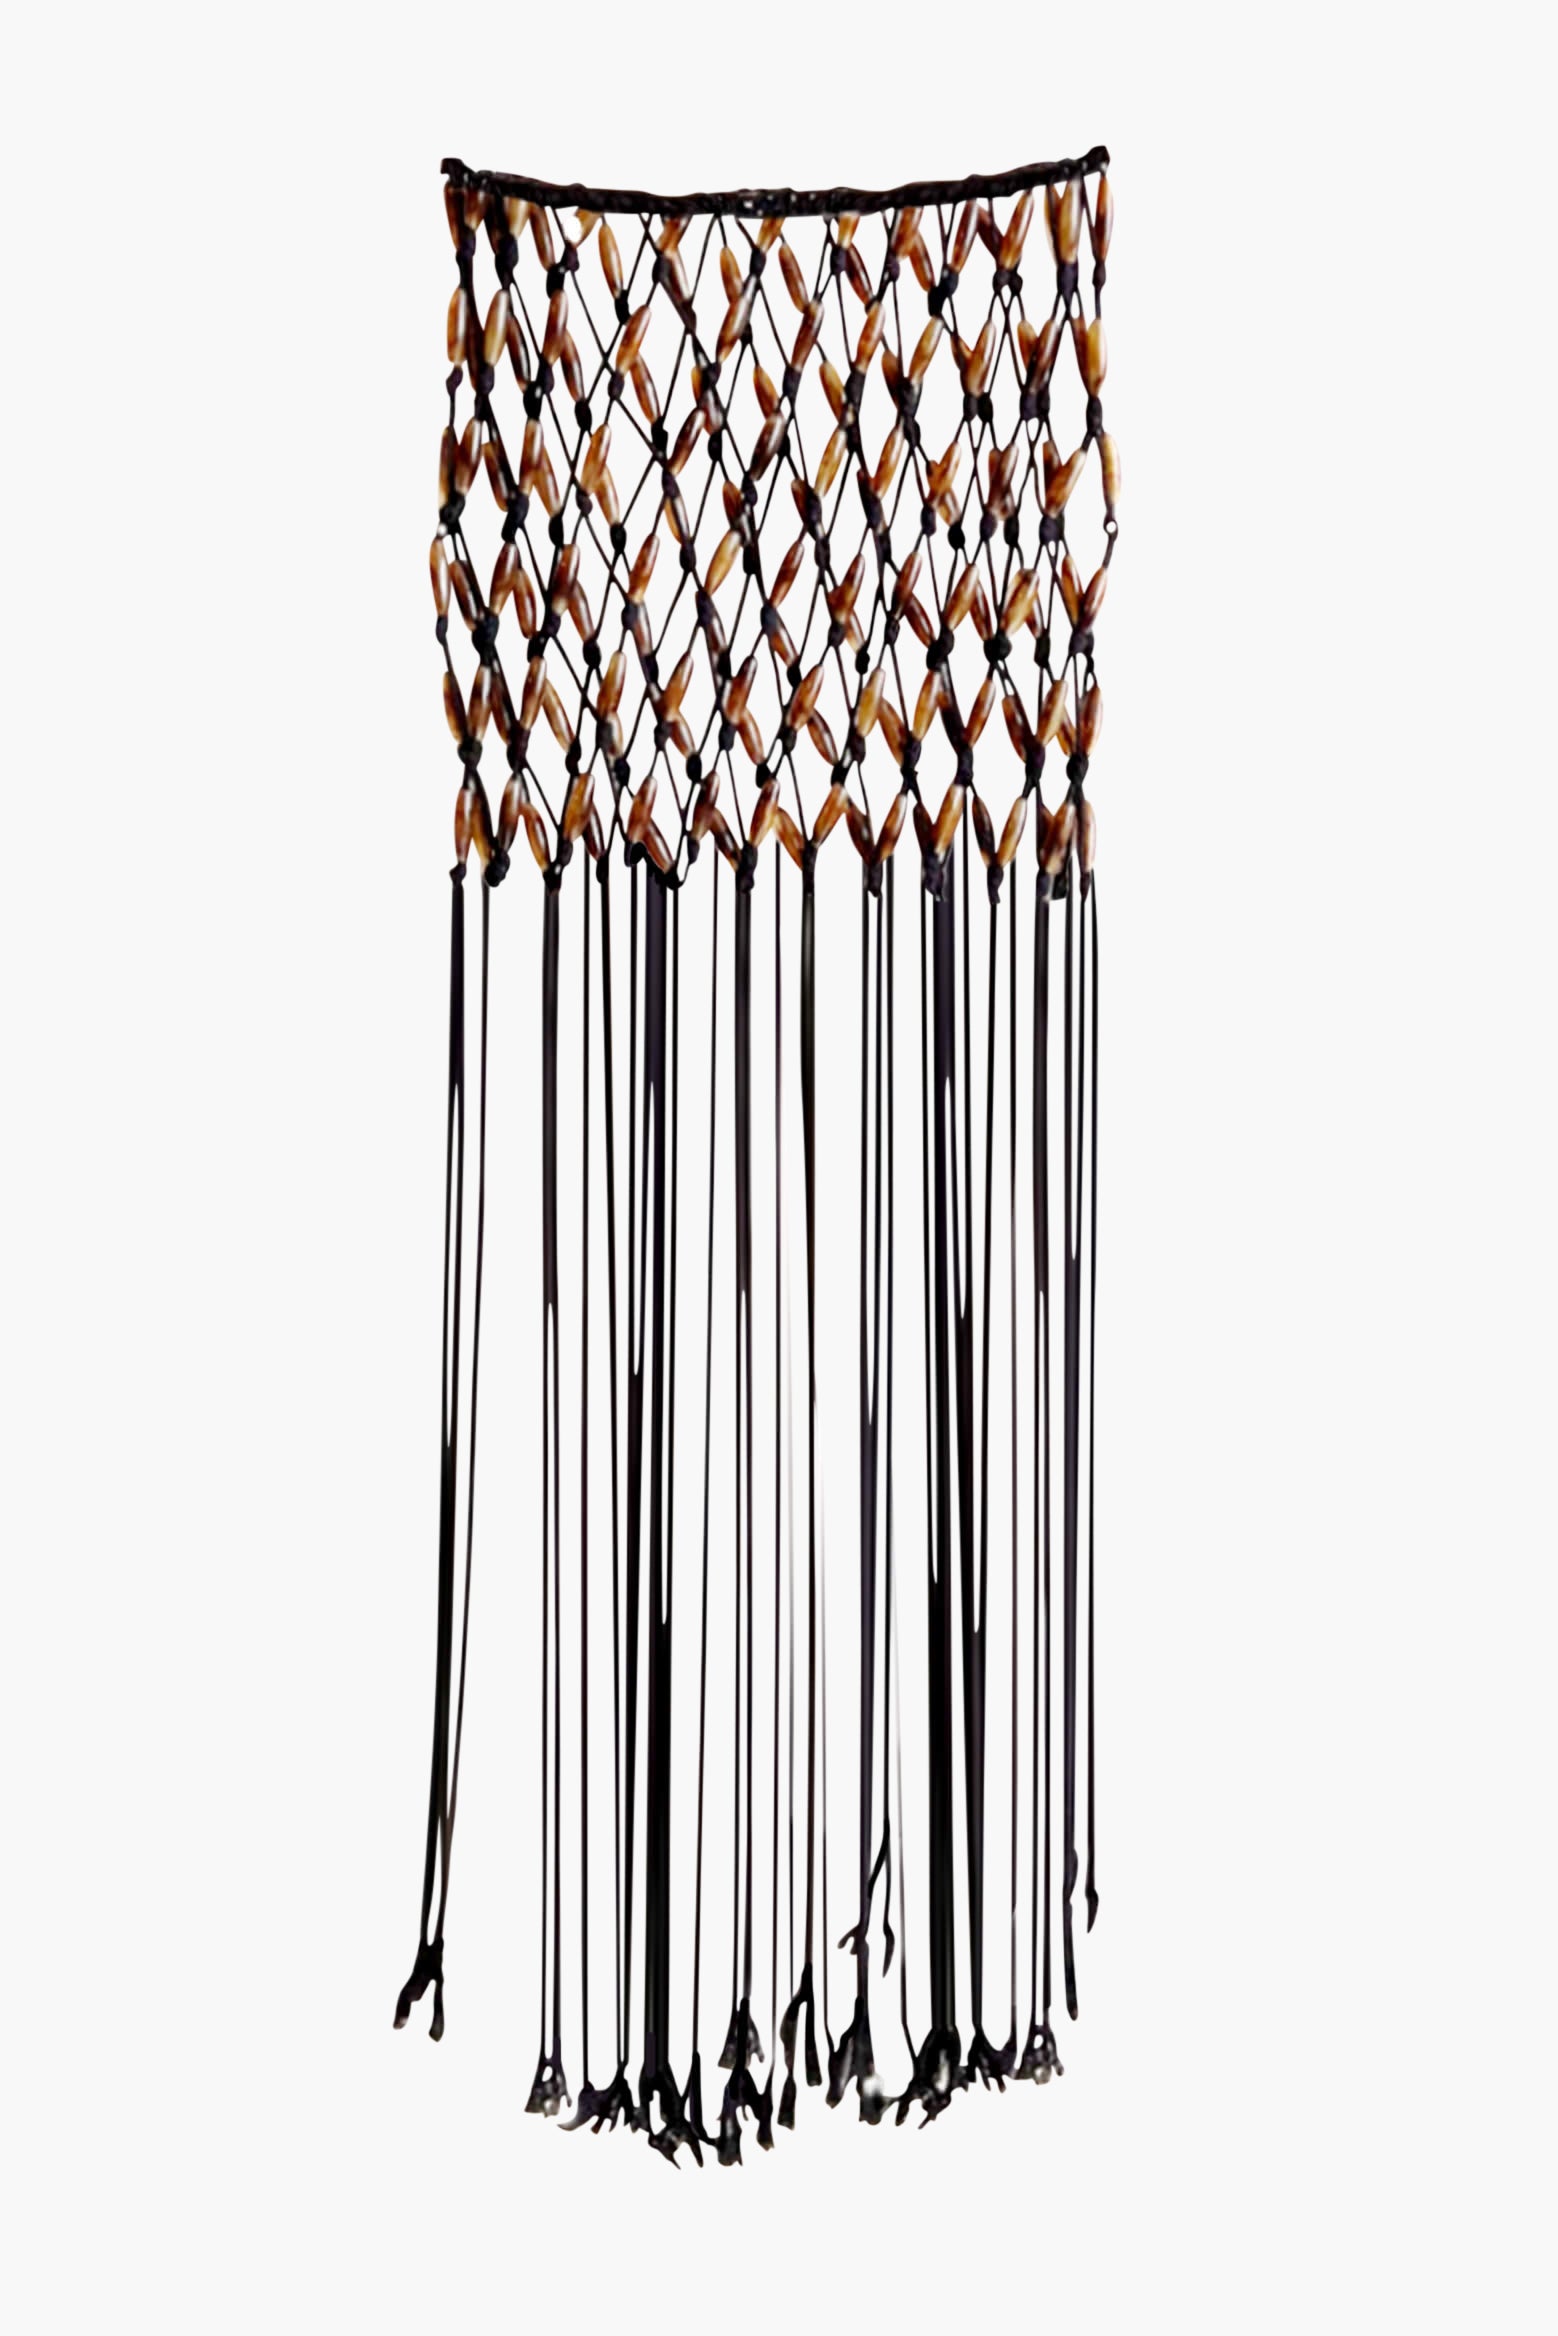 Wynn Hamlyn Macrame Bead Skirt in Black and Brown available at The New Trend